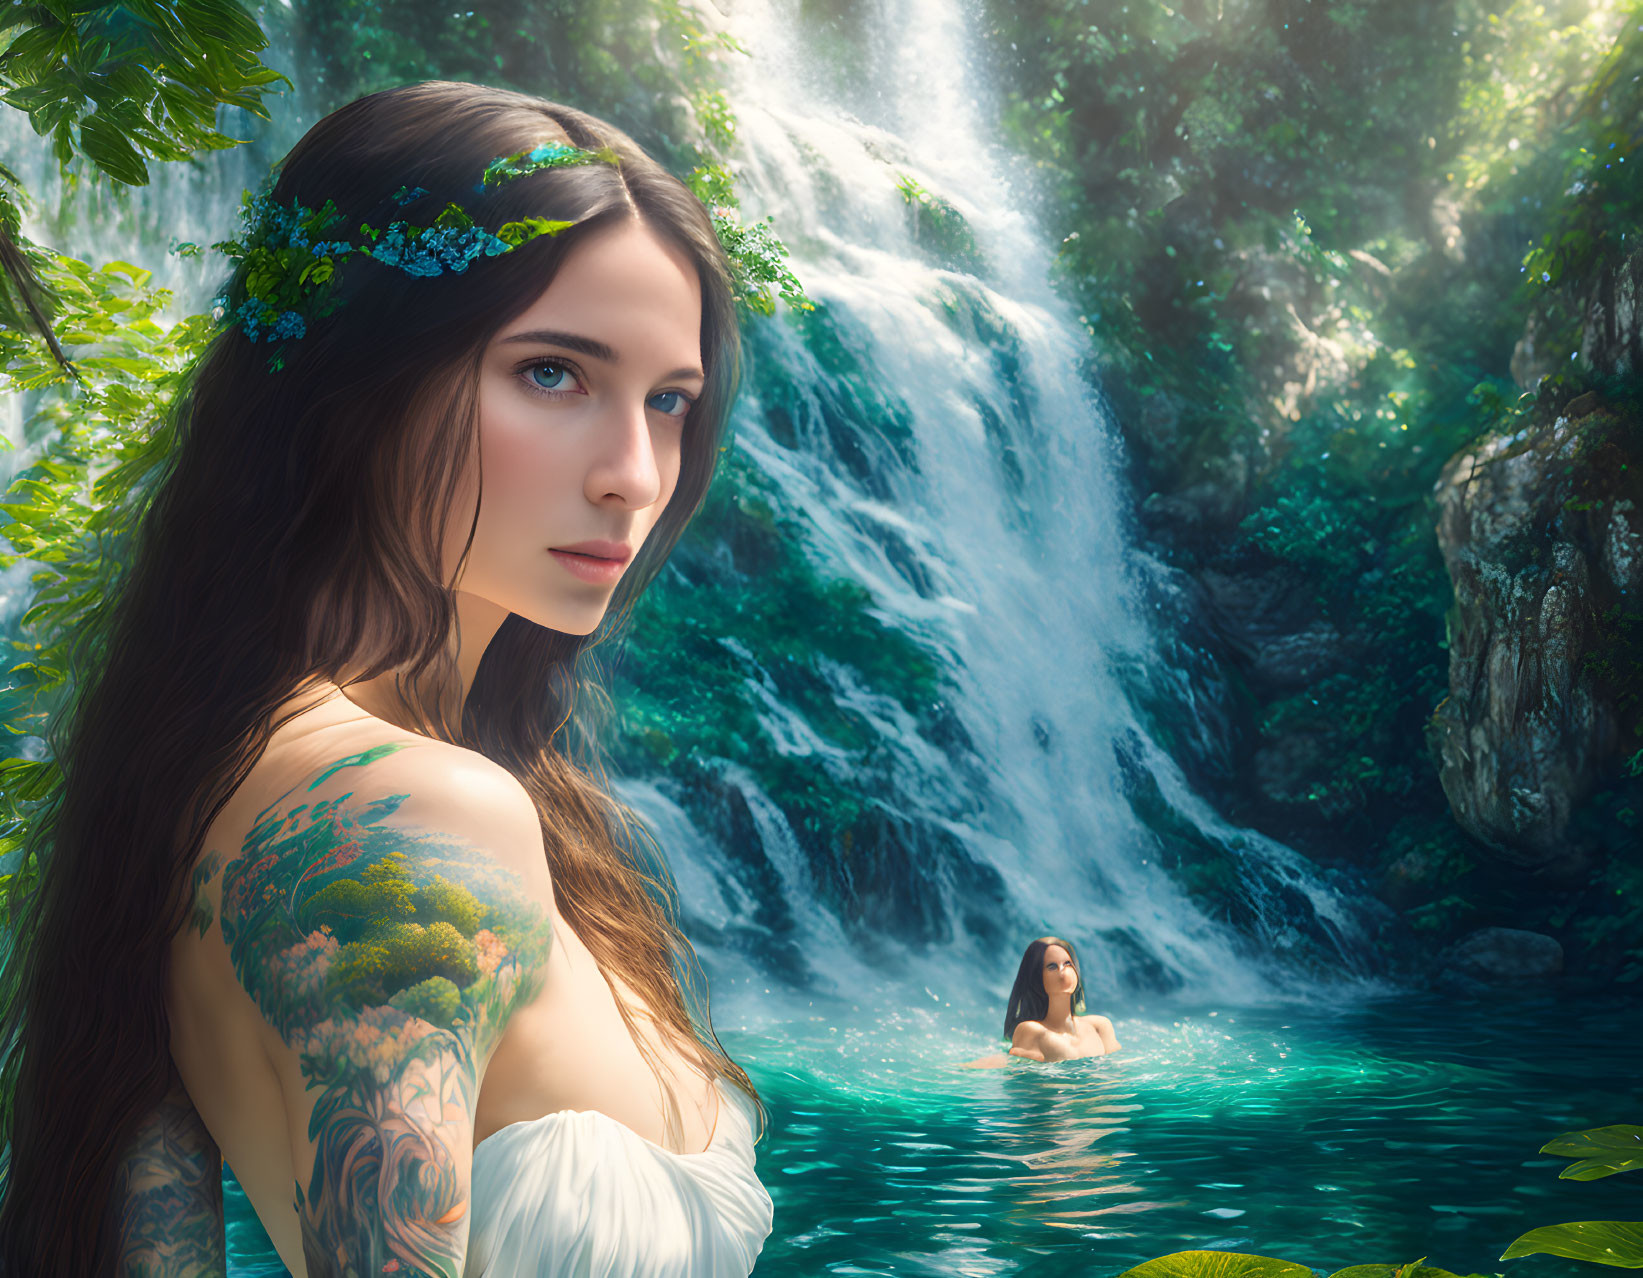 Woman with floral headband and nature tattoo by waterfall and swimmer in pool